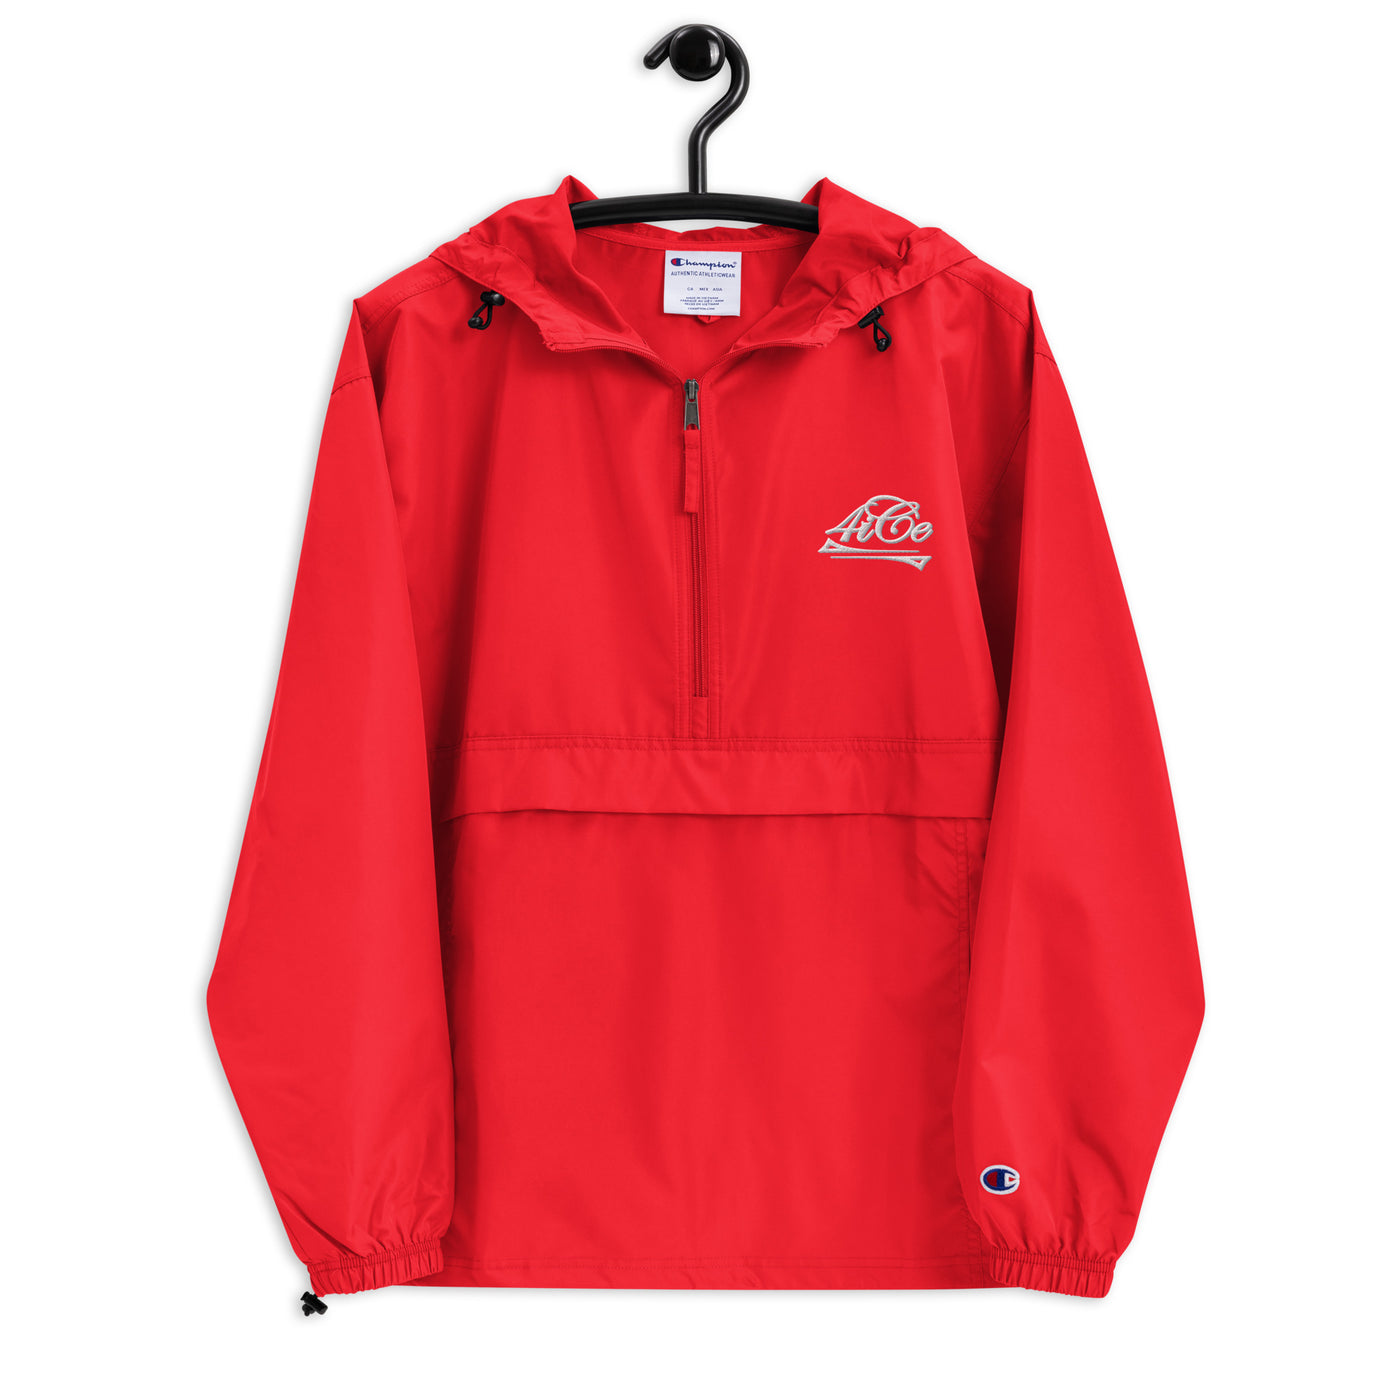 4iCe® Elite Boxing red embroidered jacket